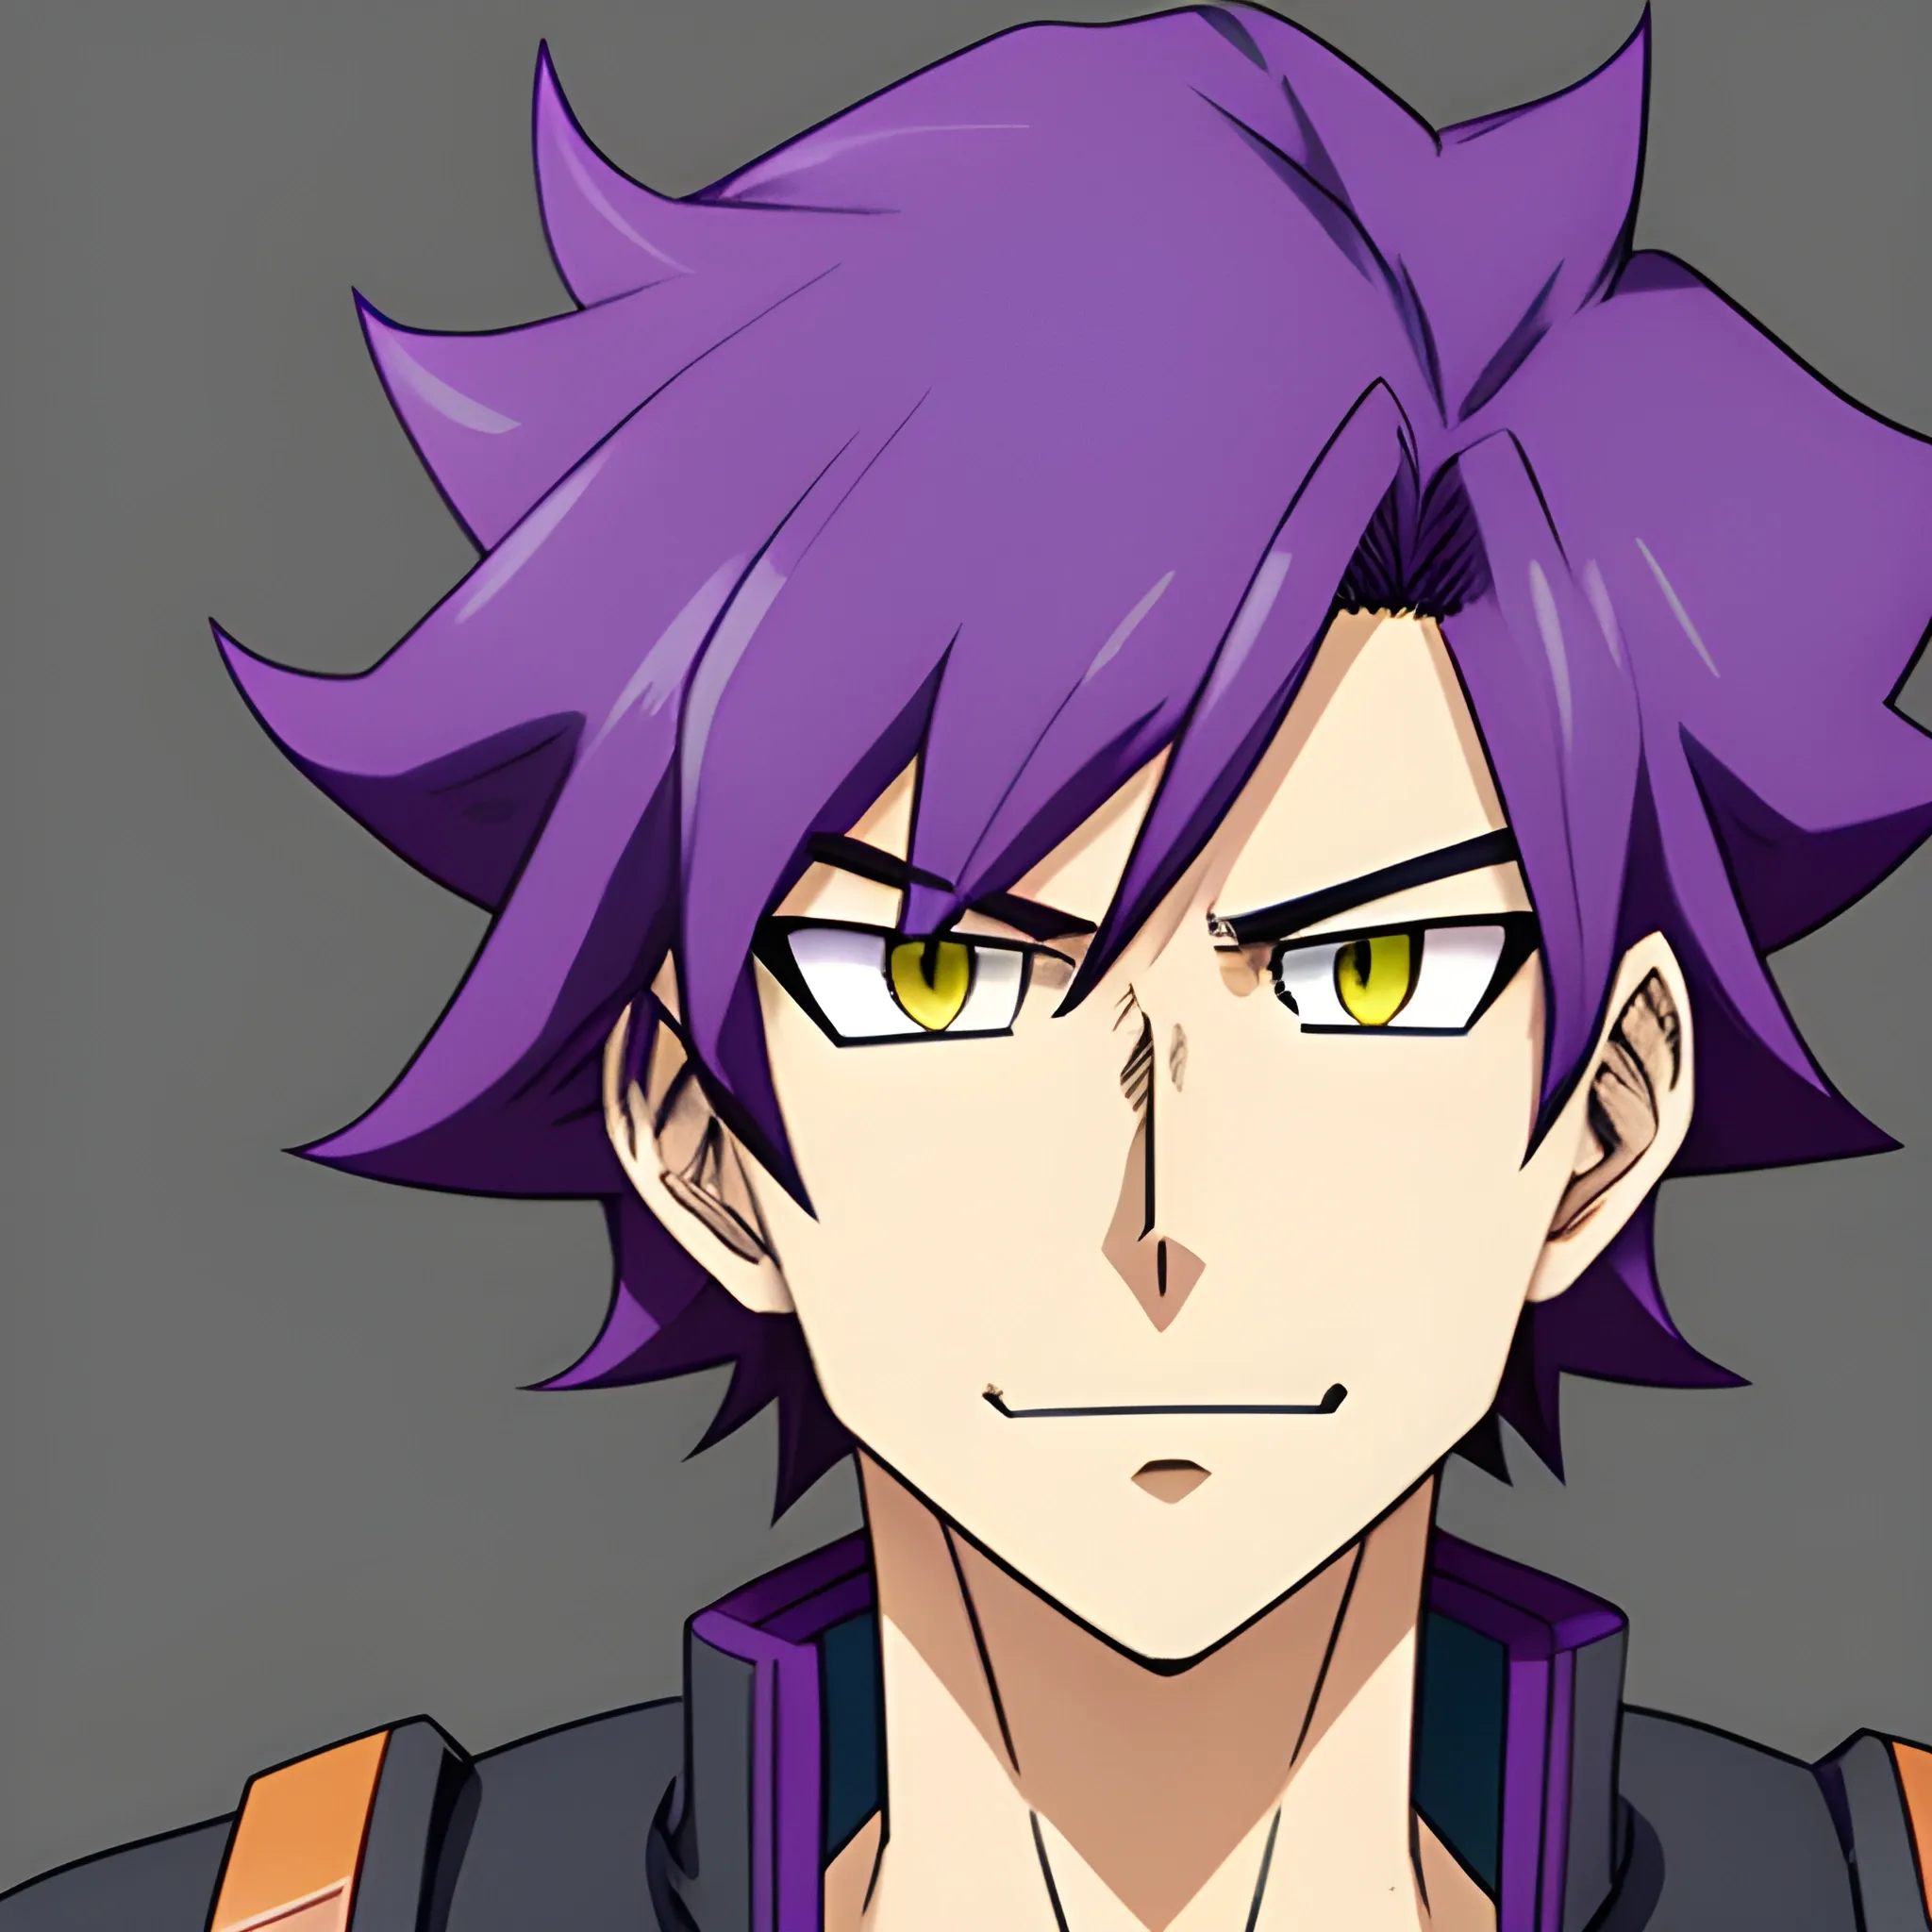 a my hero academia character 
Teen male with purple hair with copper eyes, 